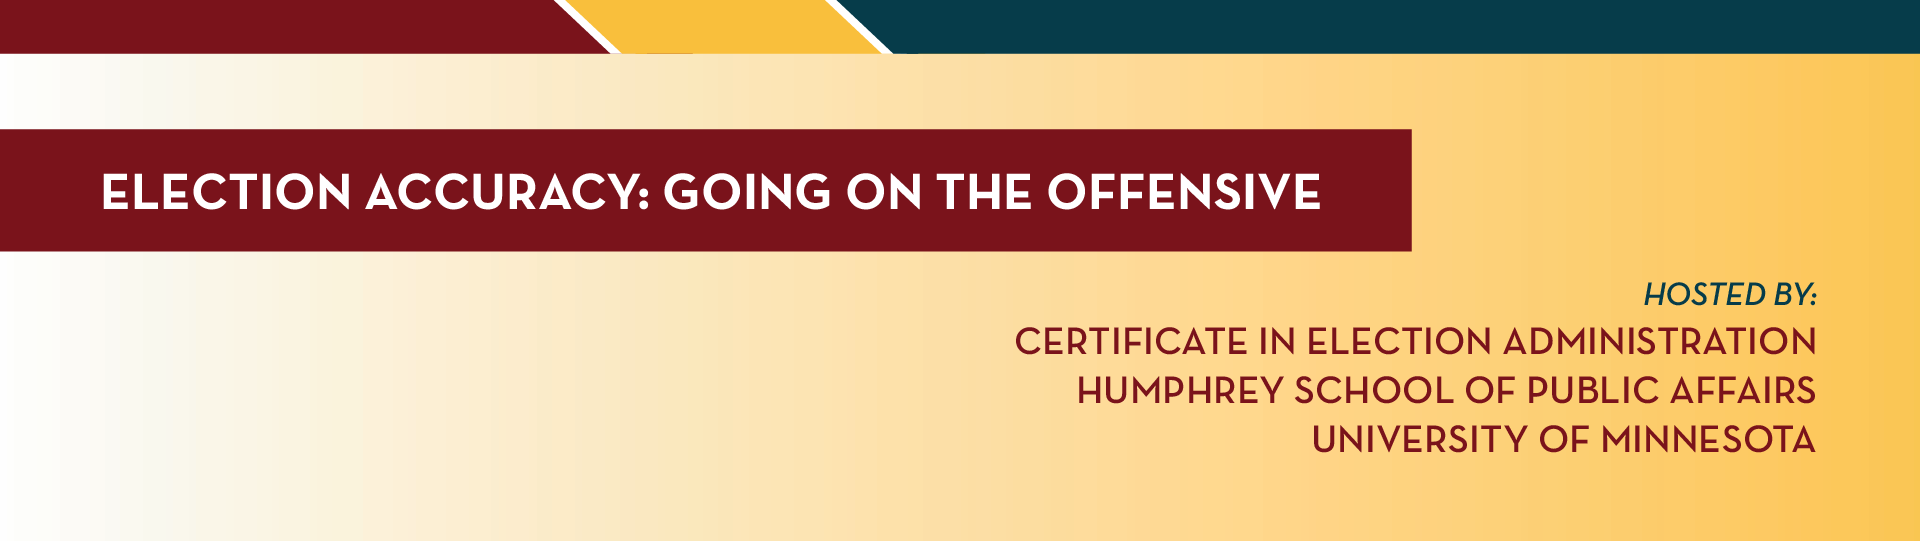 Election Accuracy: Going on the Offensive. Hosted by Certificate in Election Administration, Humphrey School of Public Affairs